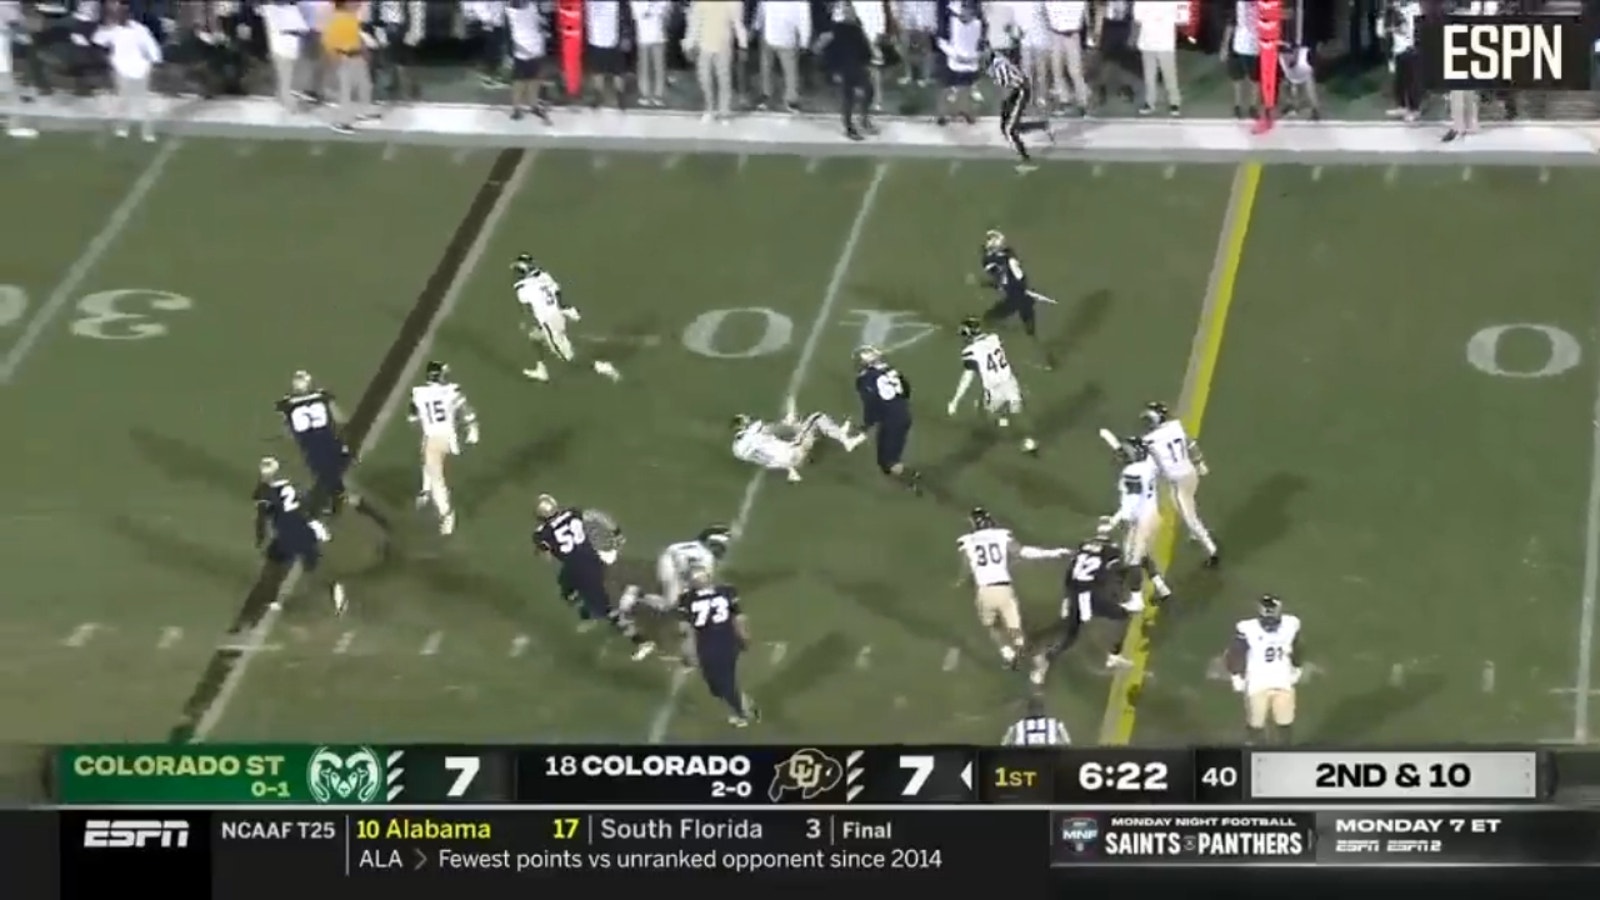 Colorado State gets a 35-yard scoop-and-score TD against Colorado